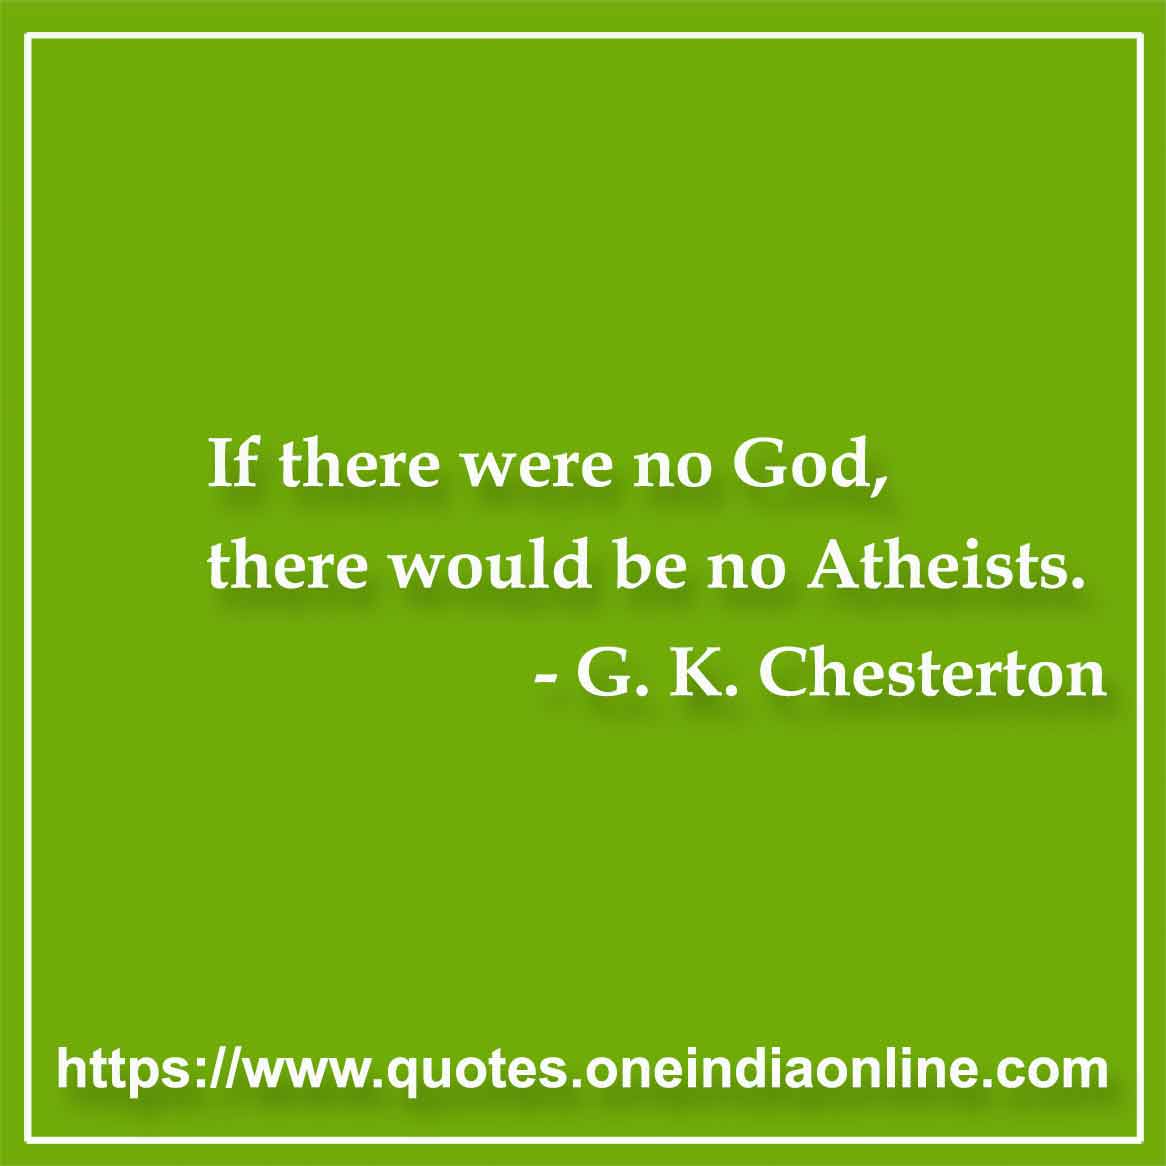 If there were no God, there would be no Atheists.